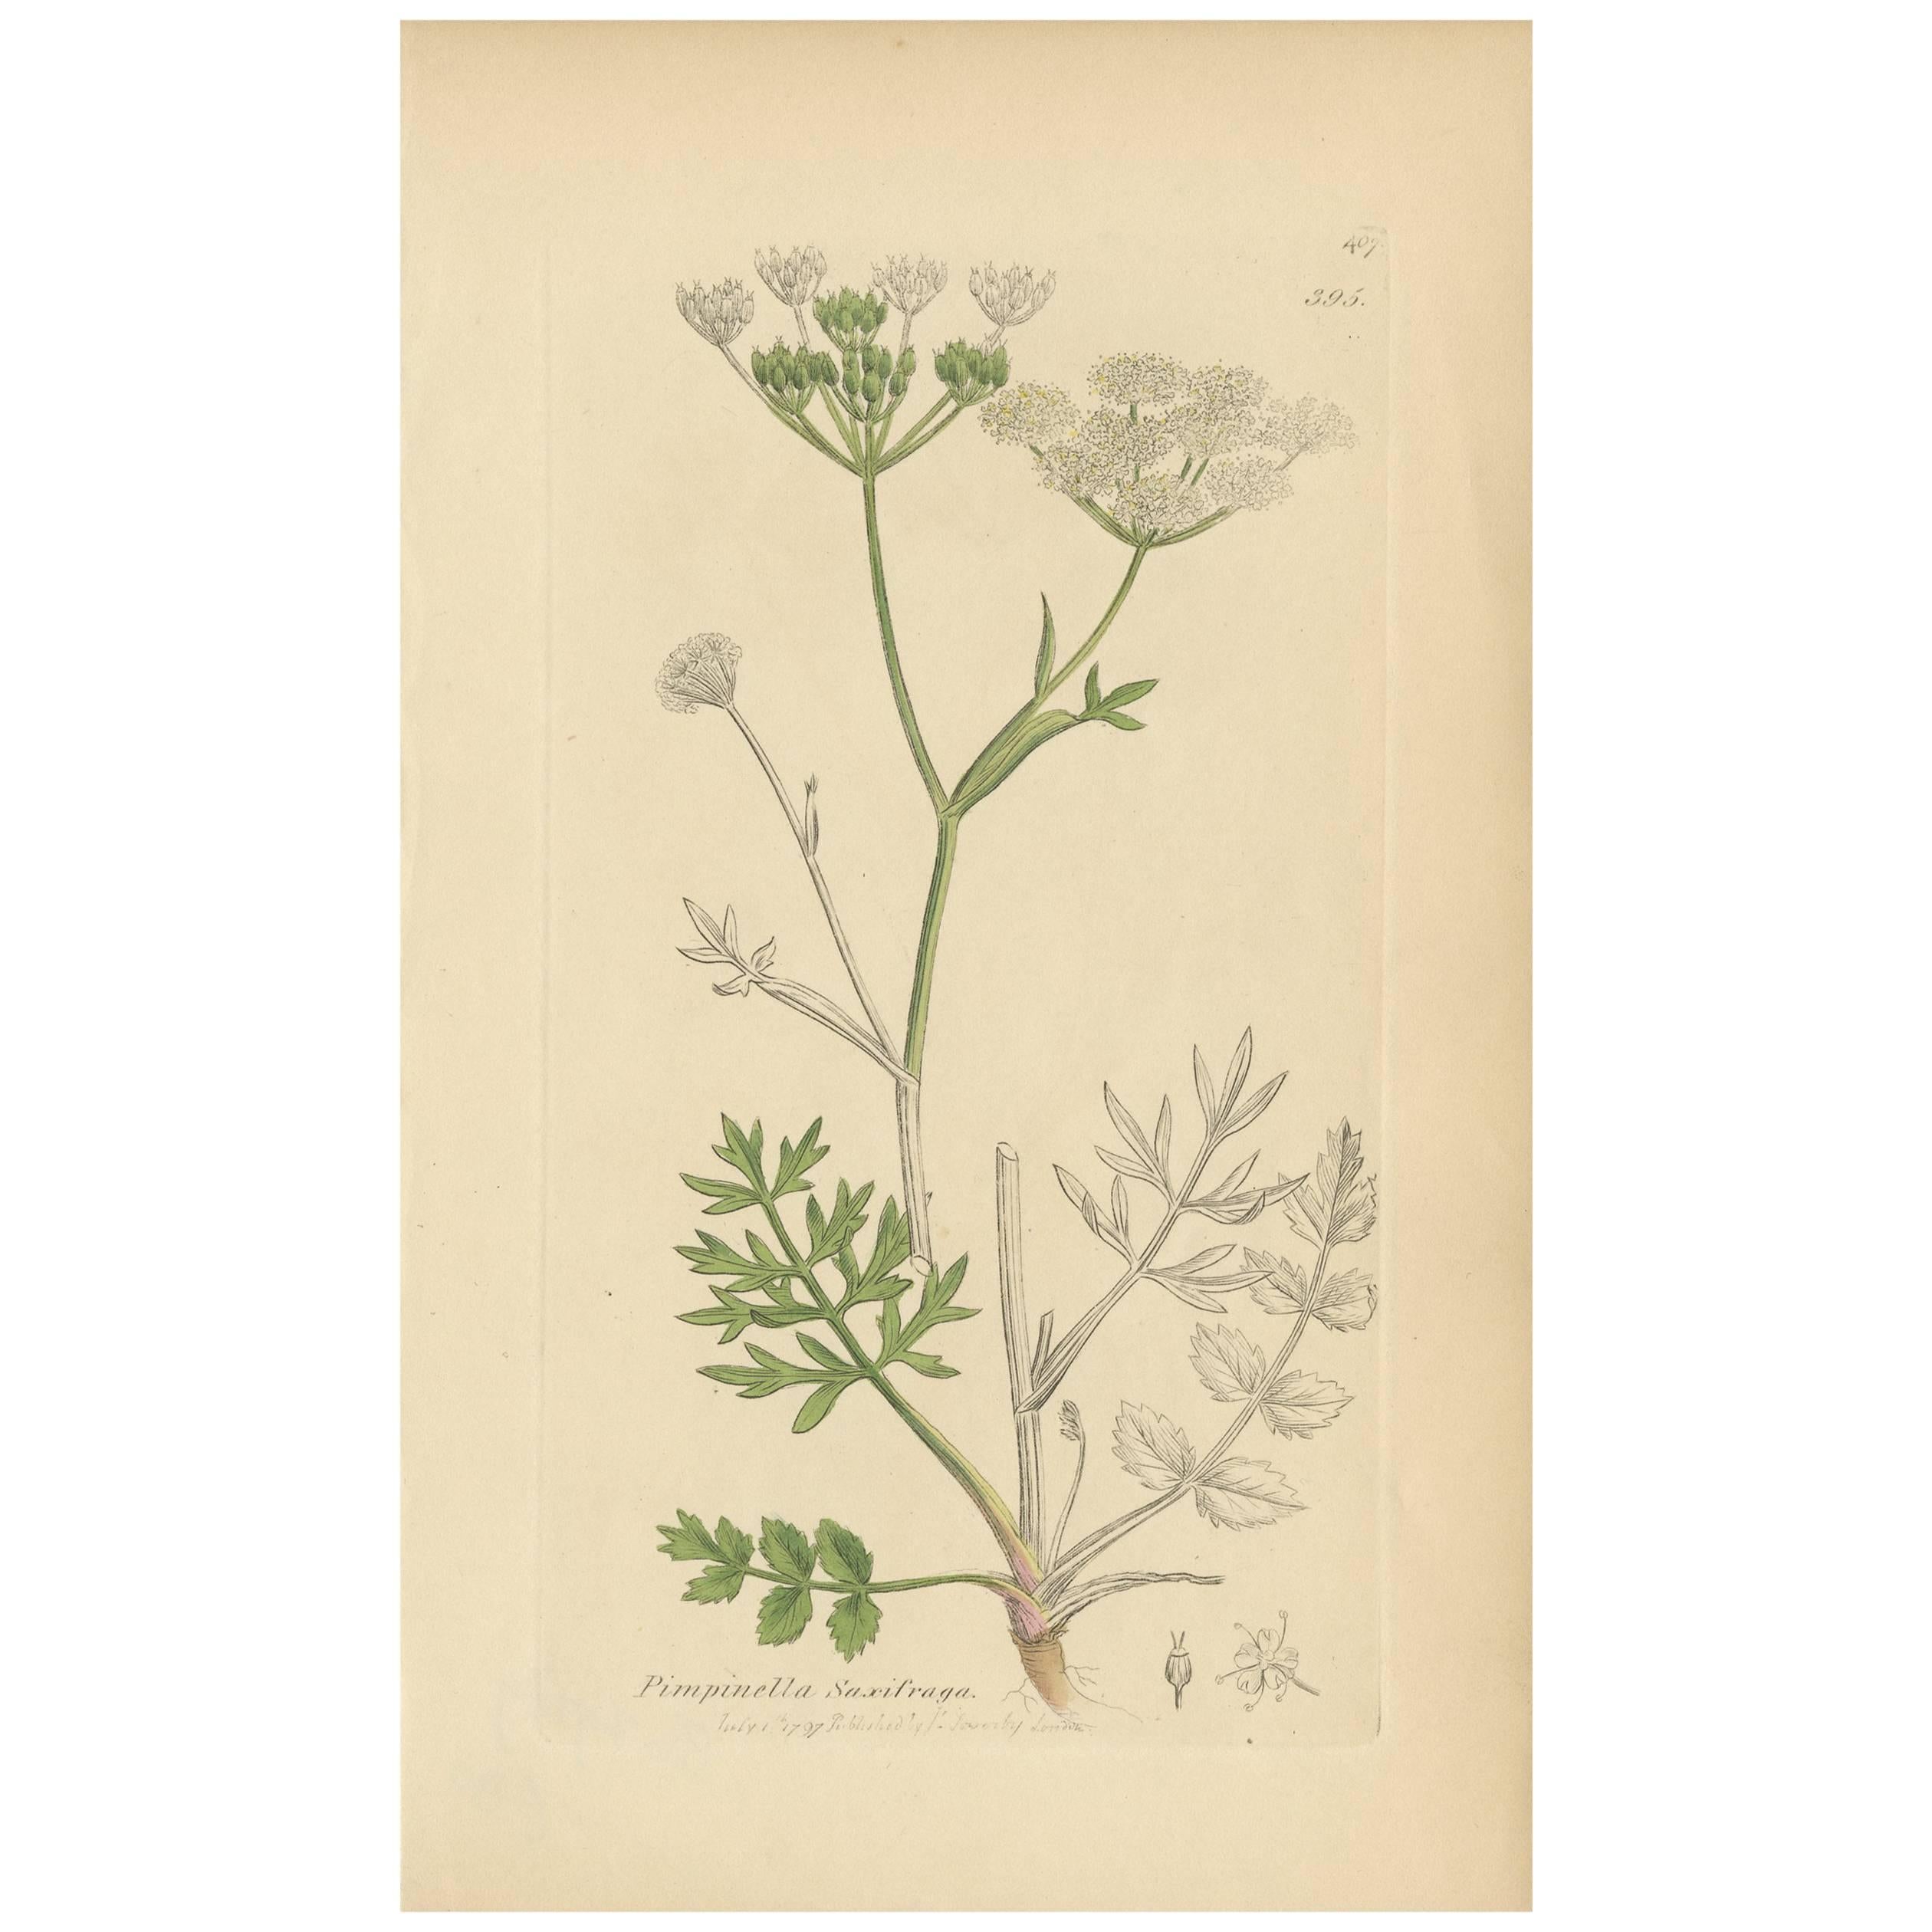 Antique Botany Print 'Pimpinella Saxifraga' by J. Sowerby, 1797 For Sale